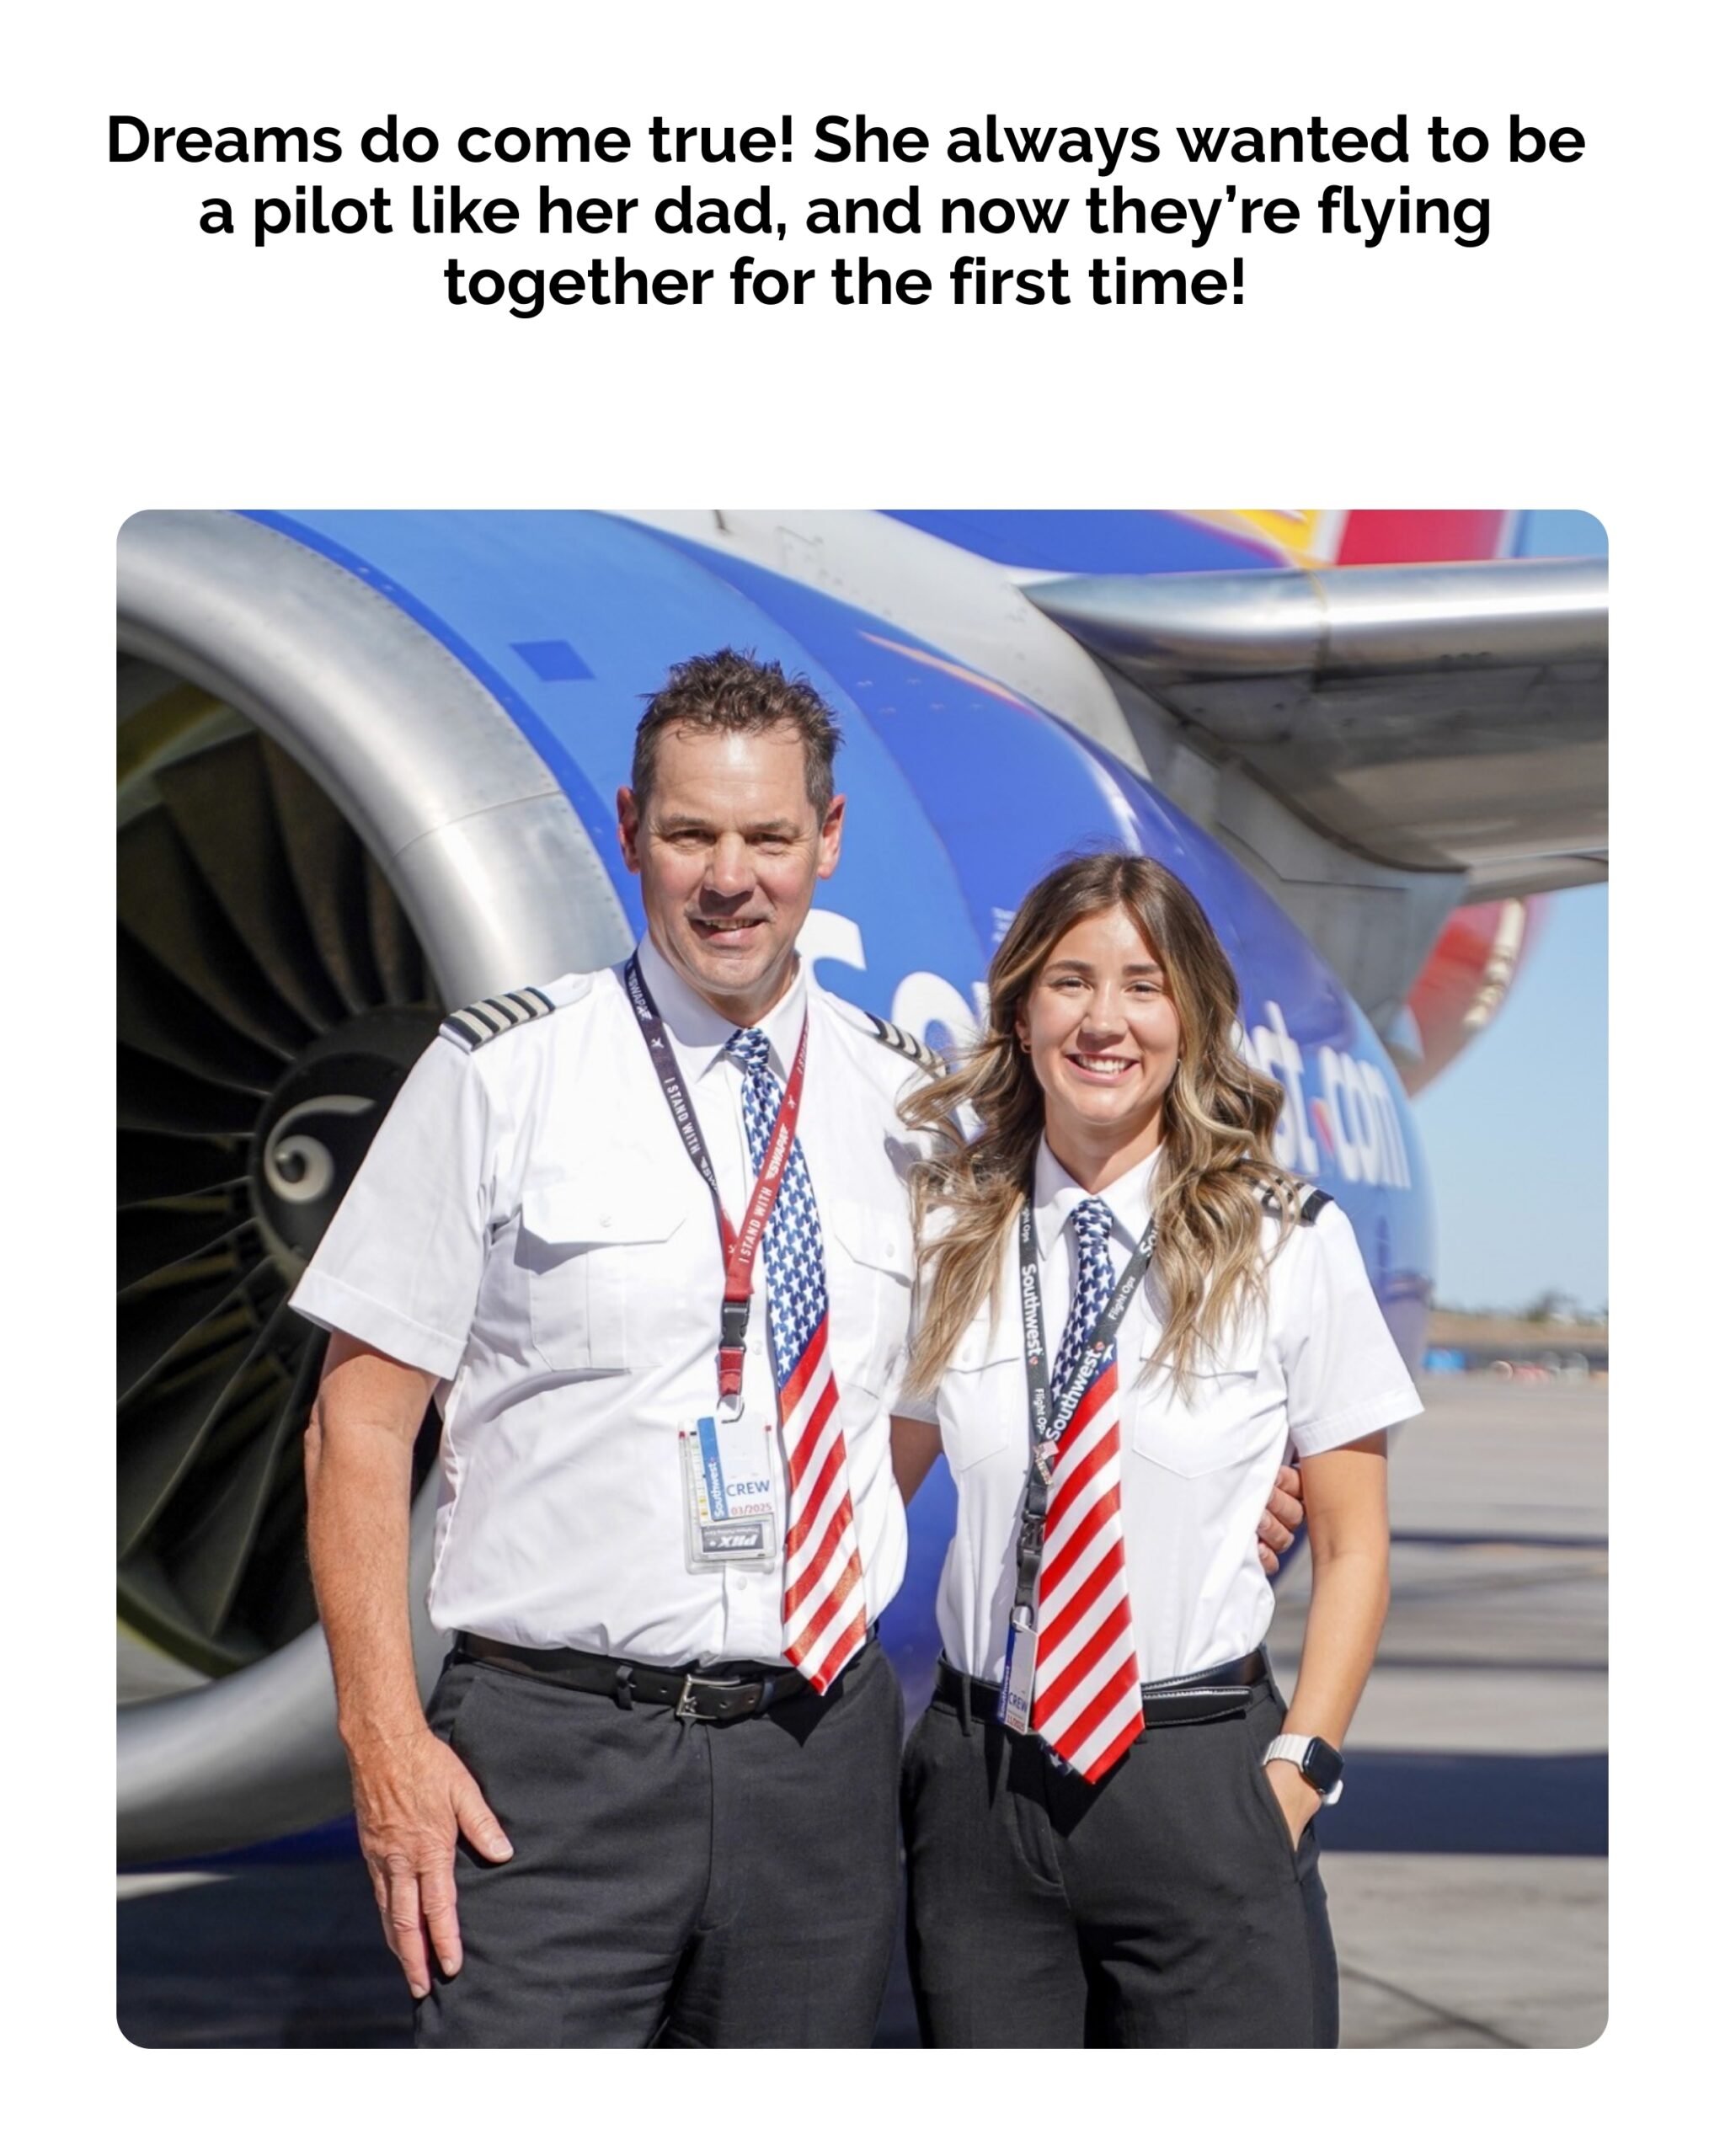 Daughter Grew Up Wanting to Be a Pilot, Like Her Dad. Now They’re Celebrating Their First Flight Together!